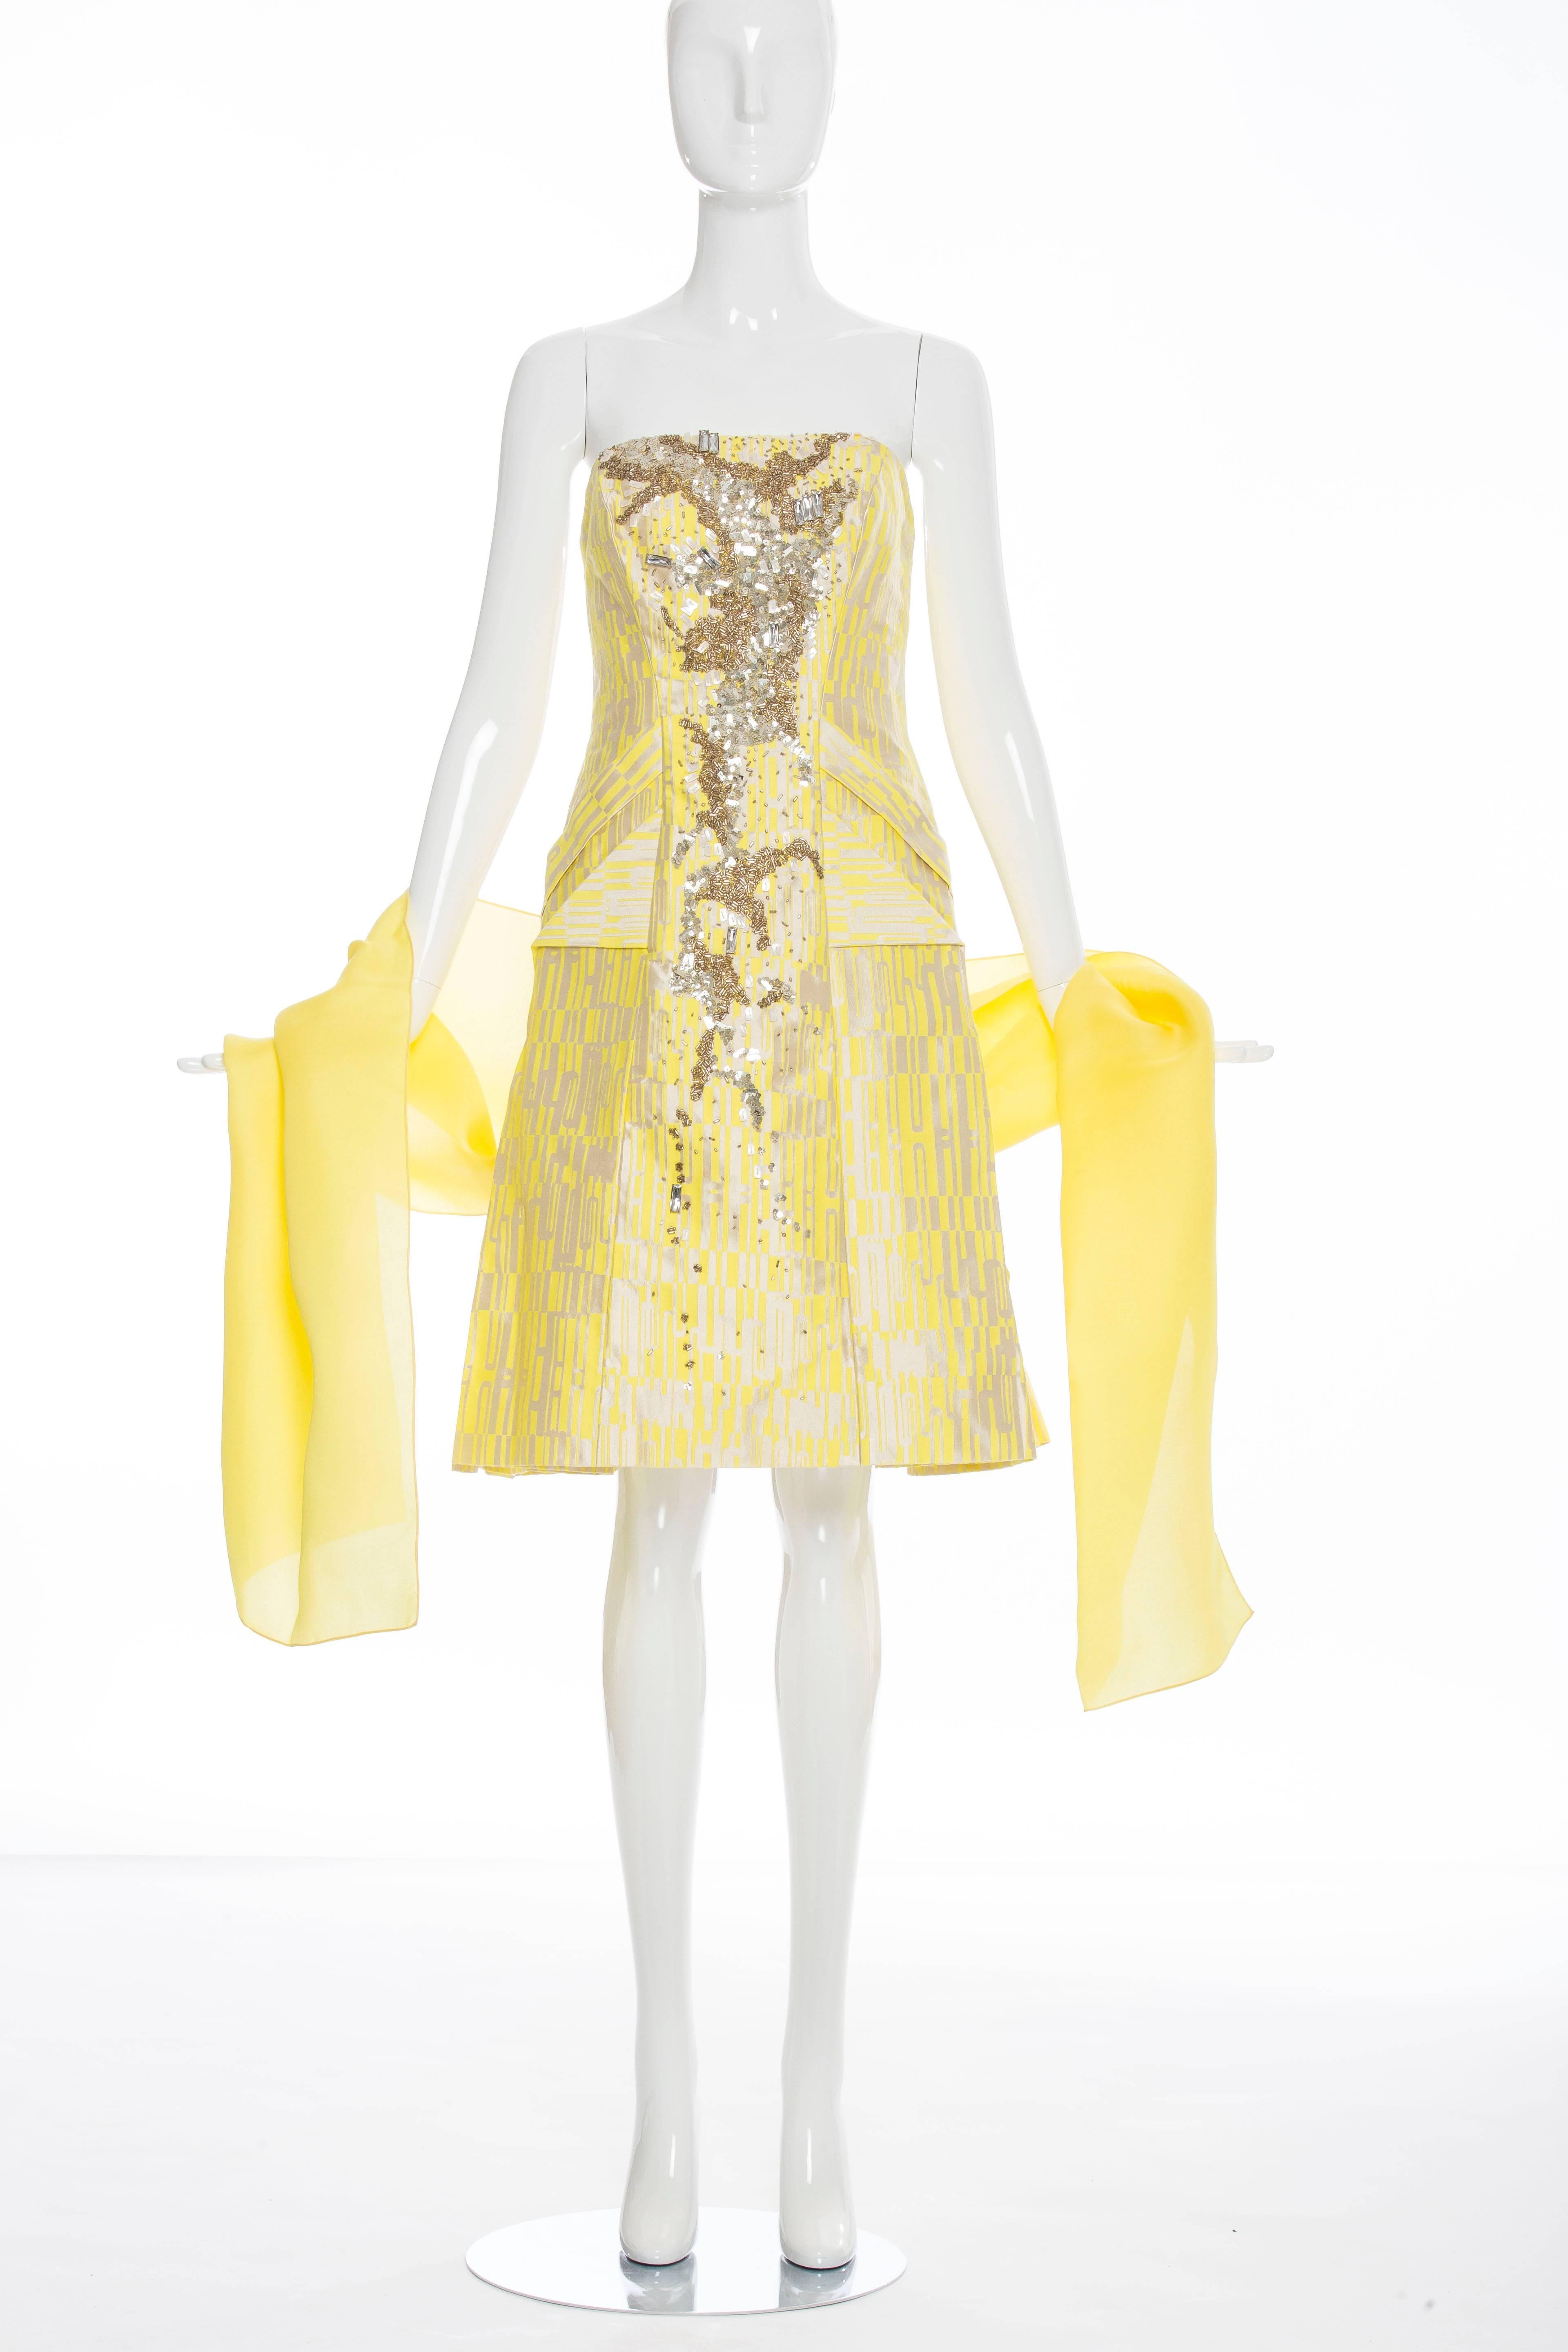 Carolina Herrera, Spring 2012, strapless dress with matching stole, front bead embellishment and back zip.